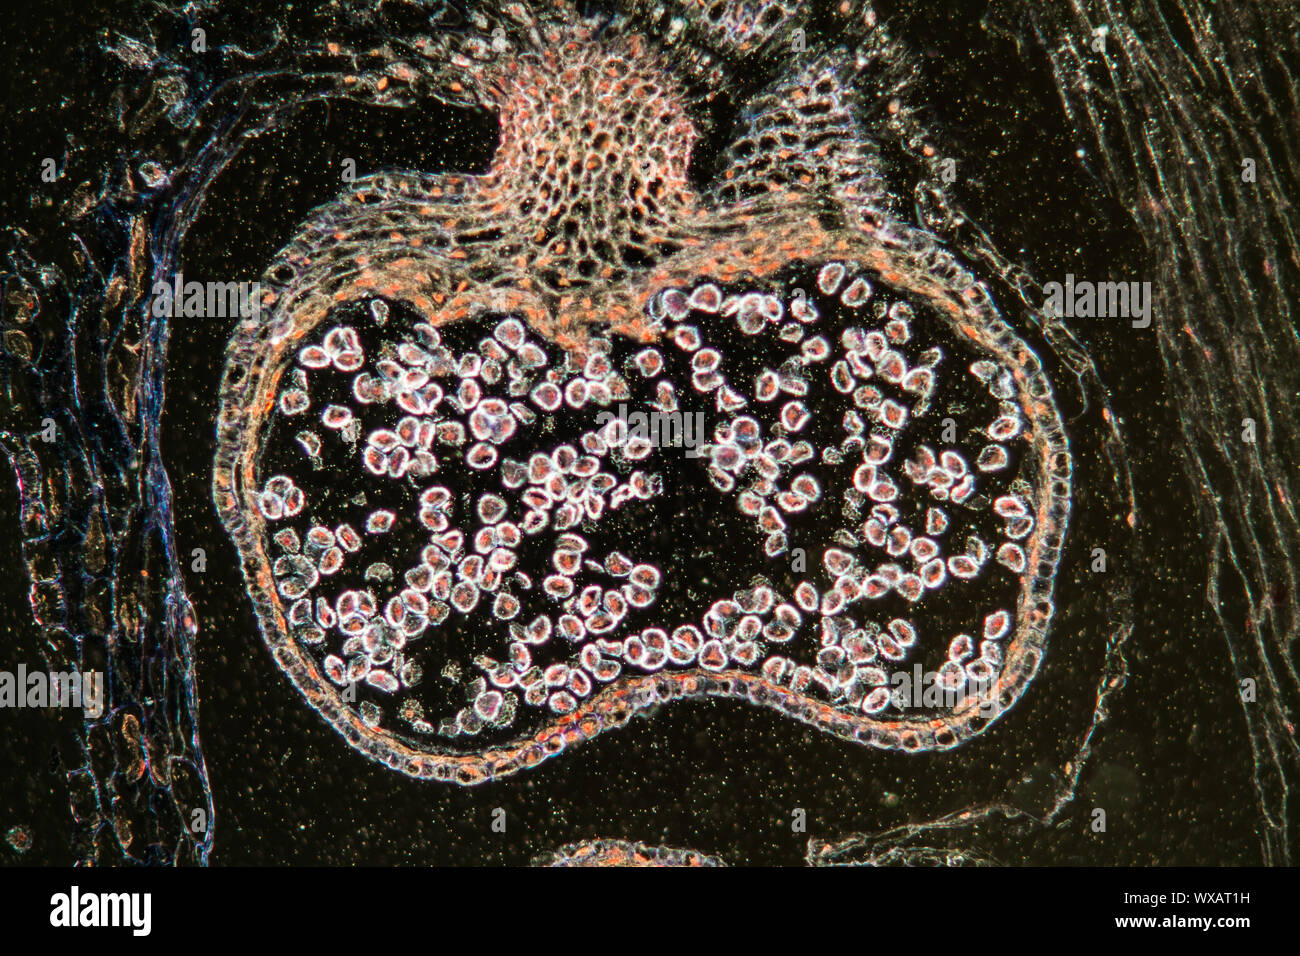 Bärlapp flower with spores cross-section under the microscope 100x Stock Photo